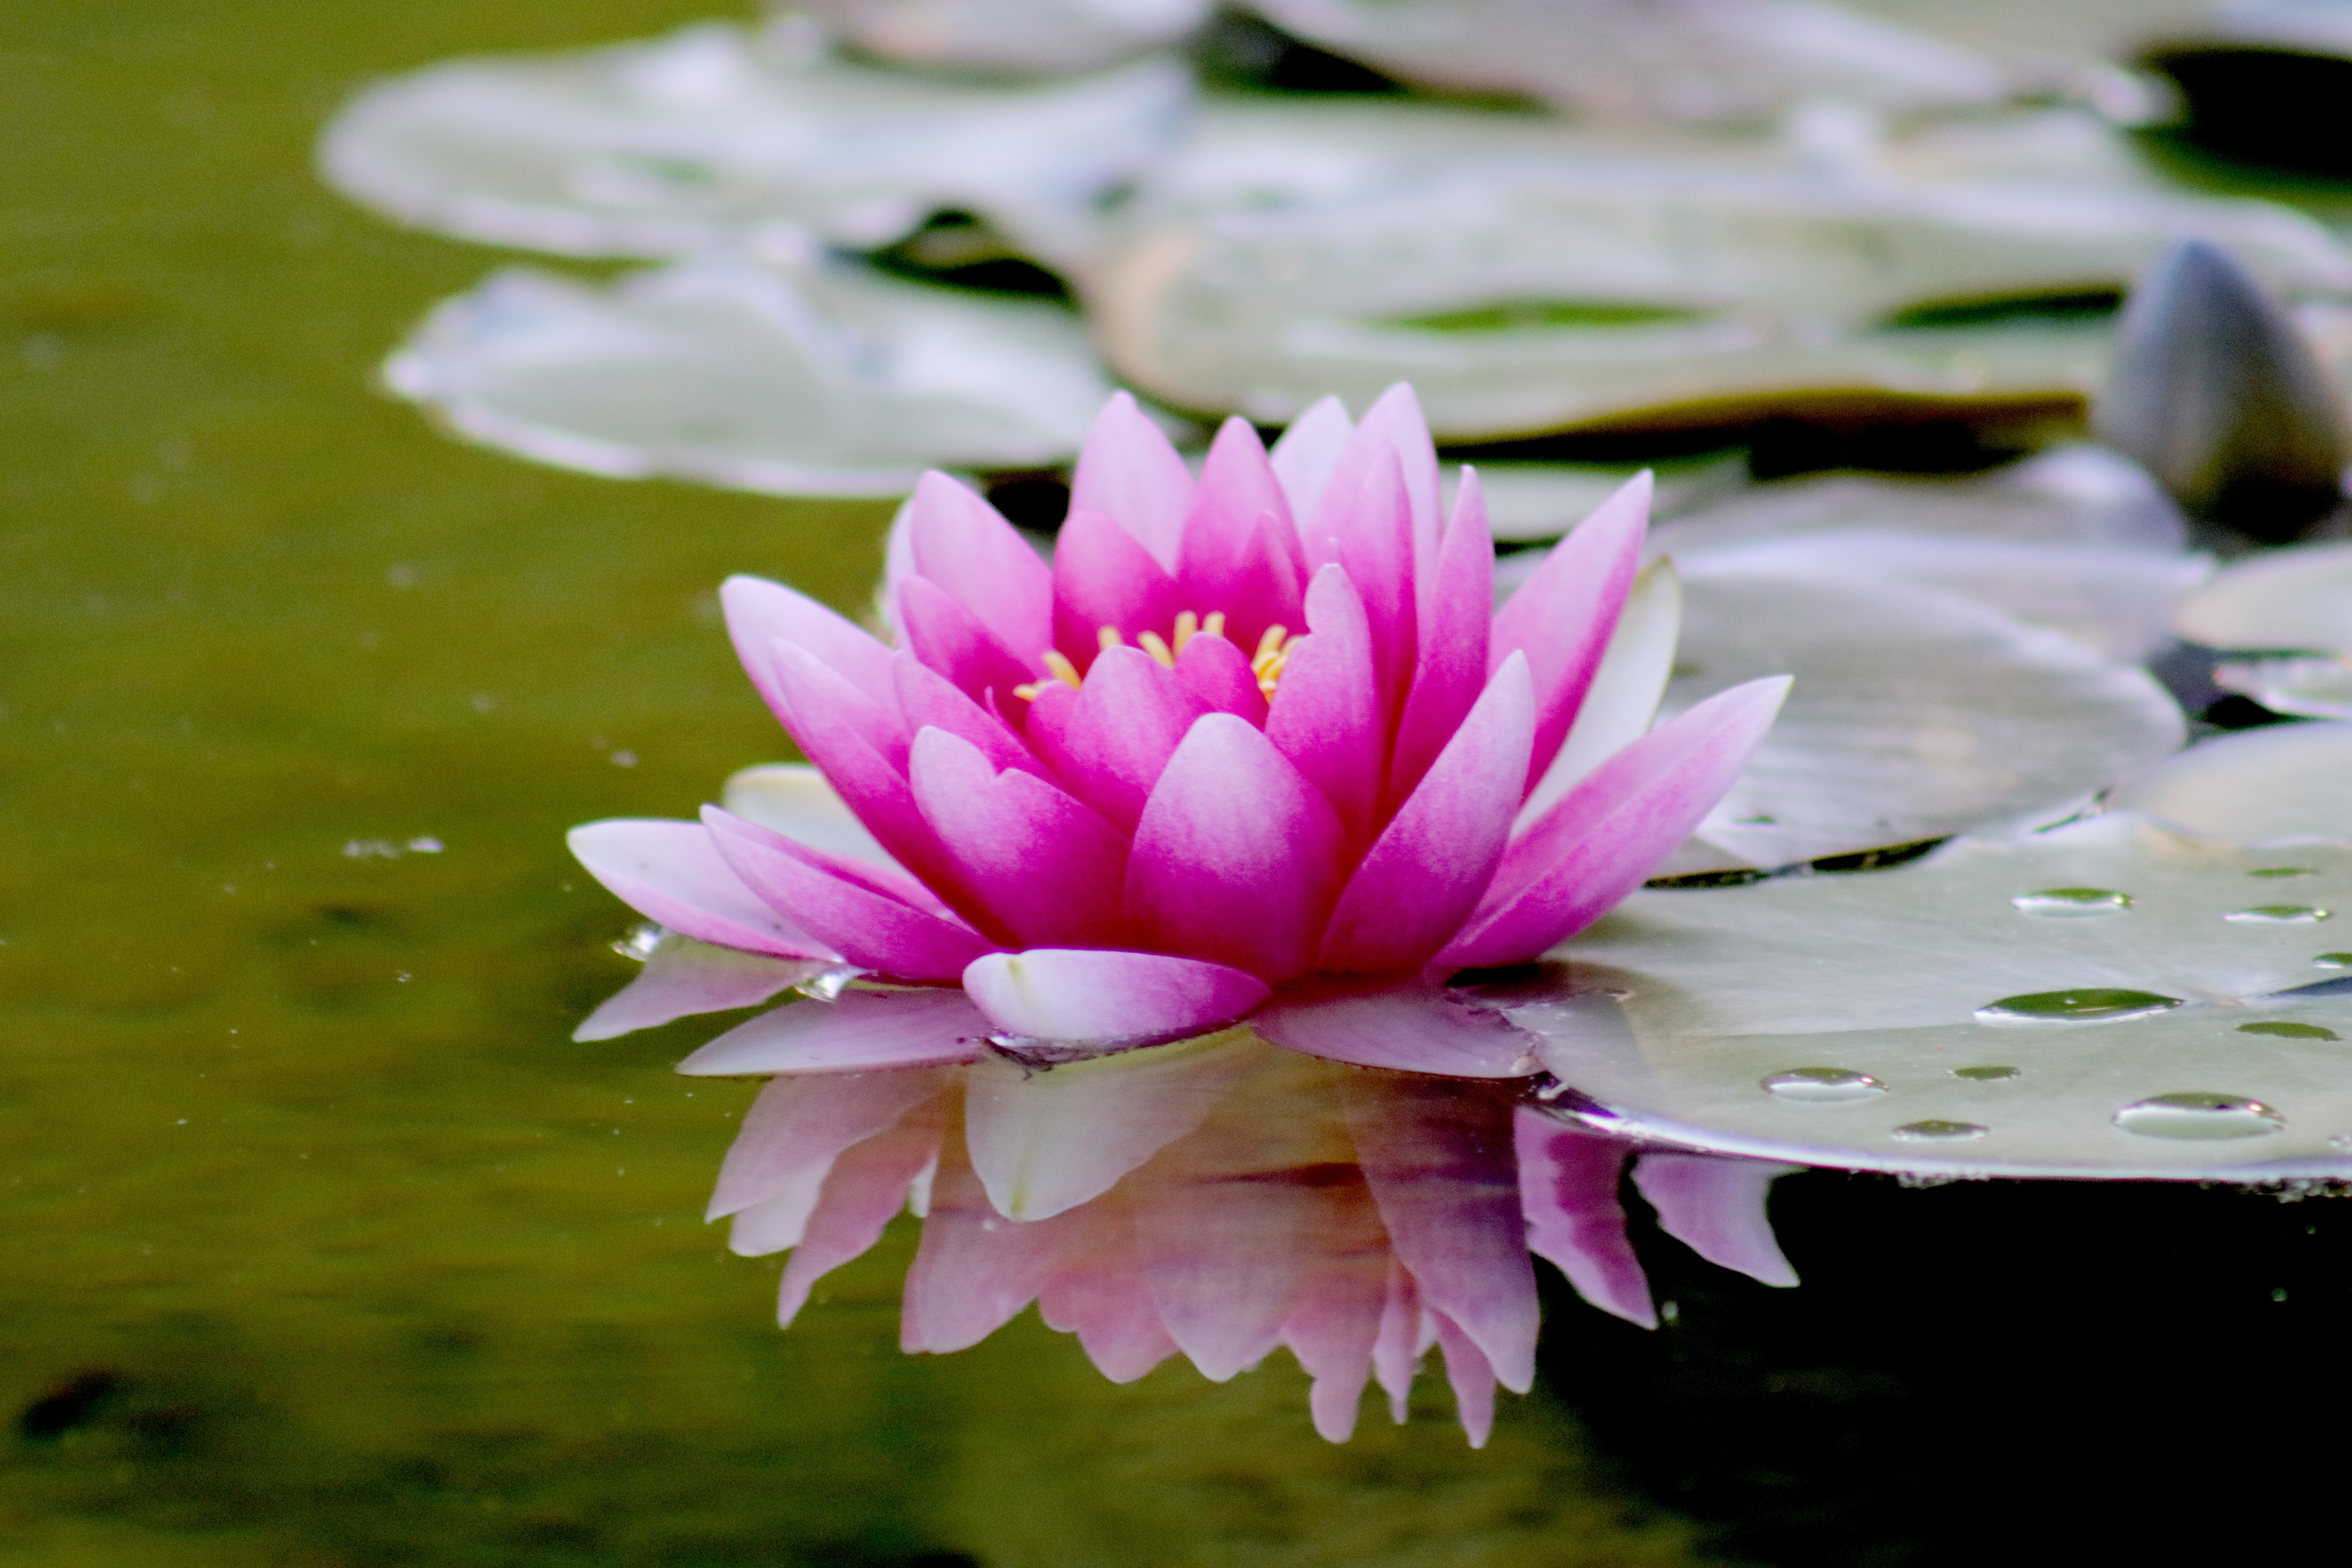 1000+ Great Water Lily Photos · Pexels · Free Stock Photos